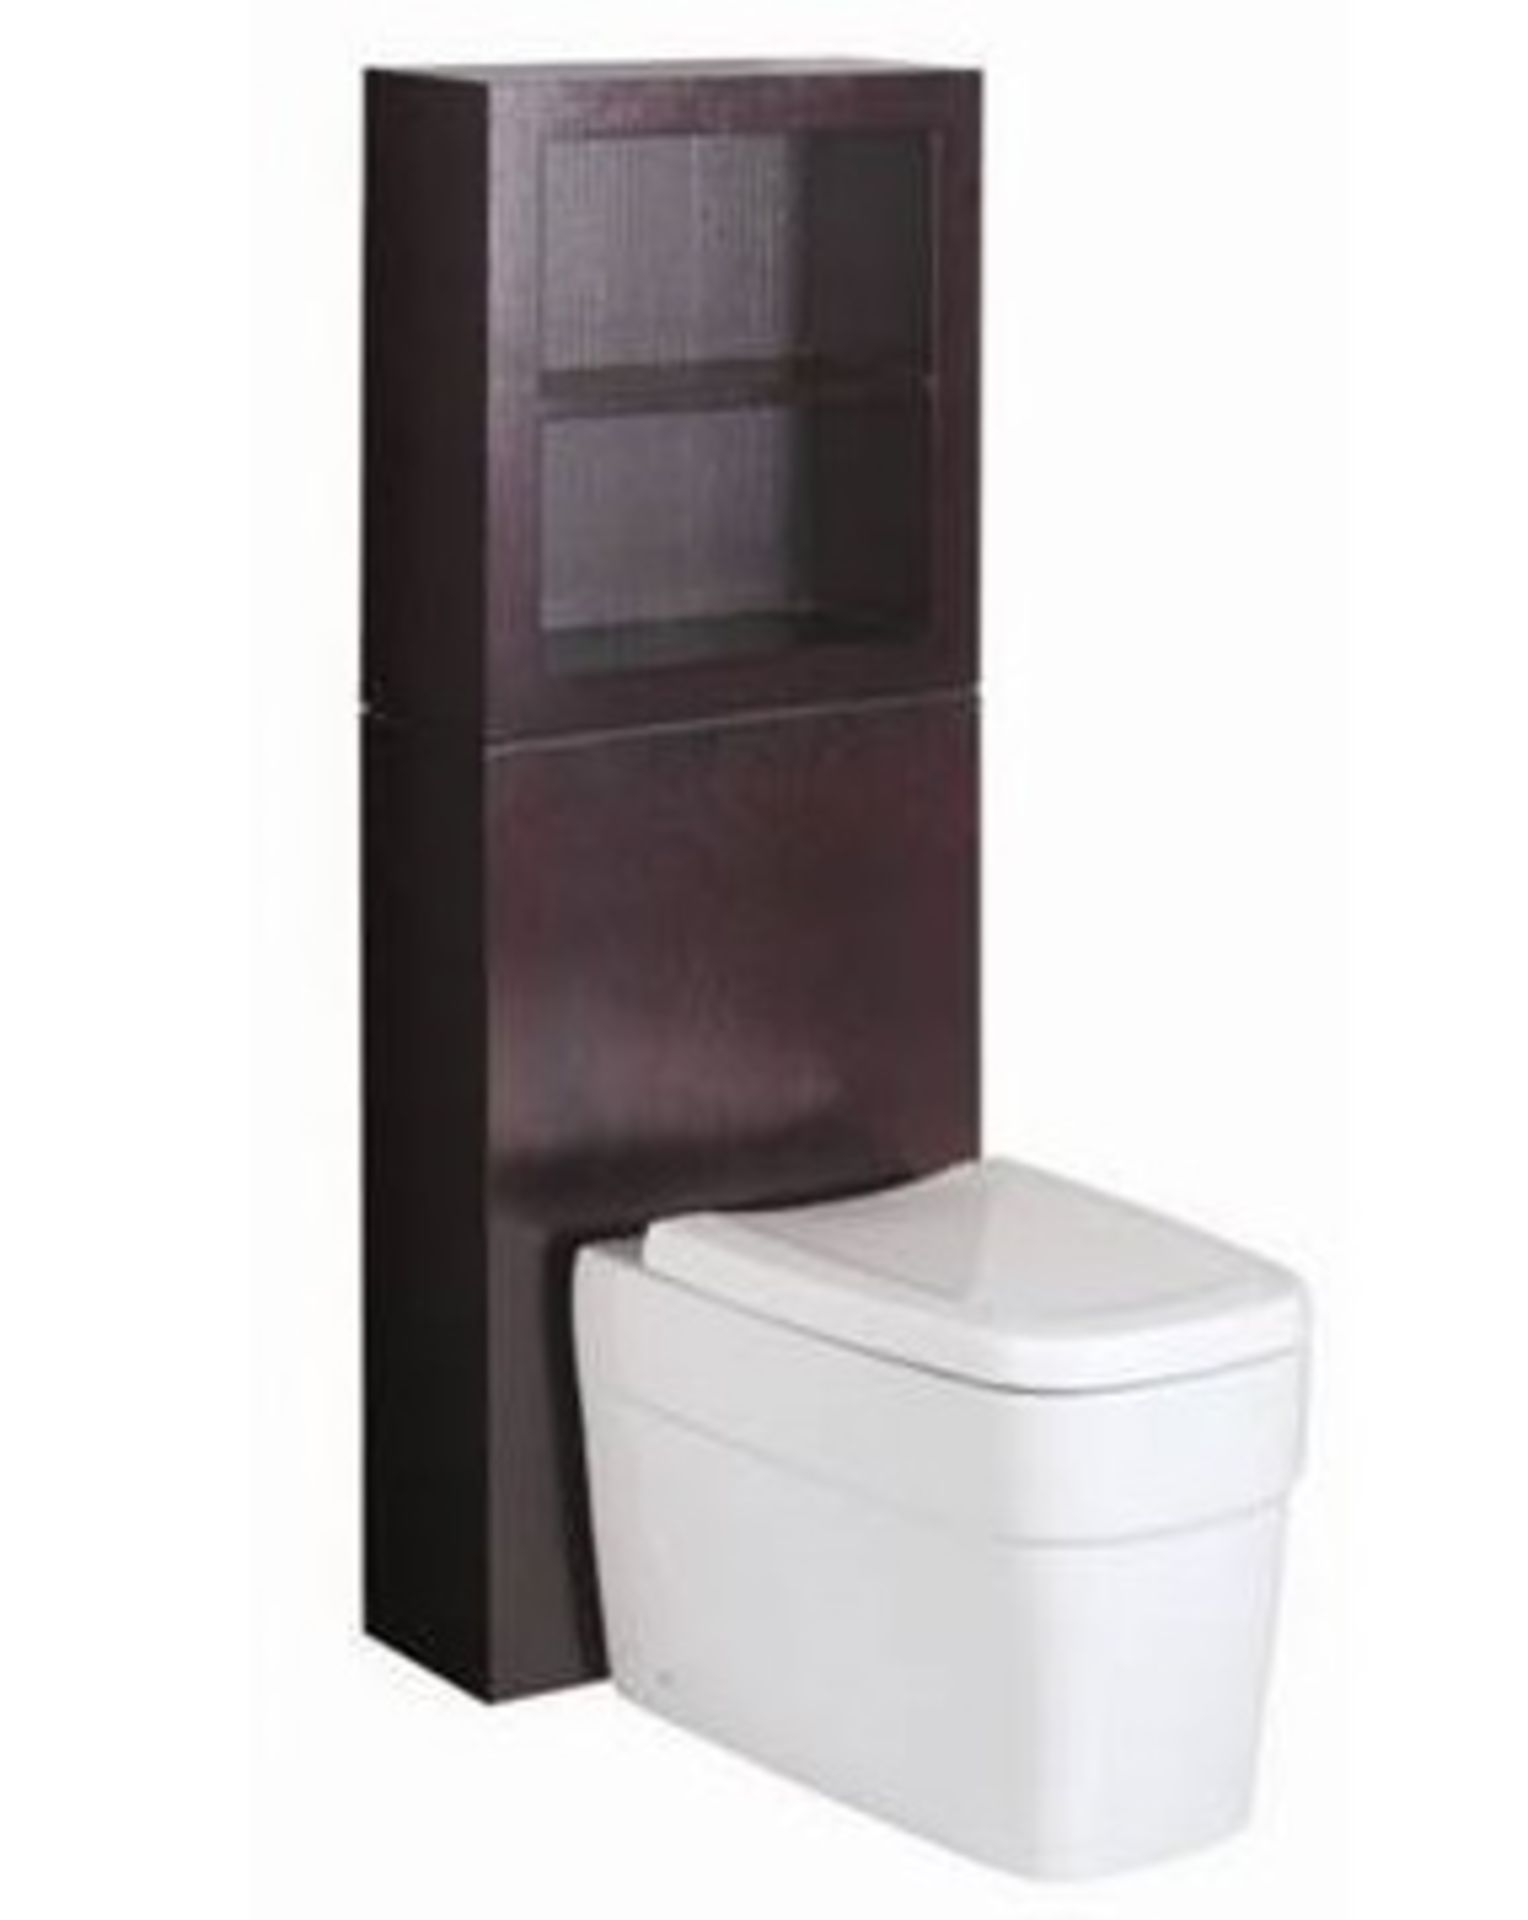 1 x Vogue ARC Bathroom BTW Cistern Unit With Top Shelf - Natural Oak - Type 2E - Manufactured to the - Image 2 of 2